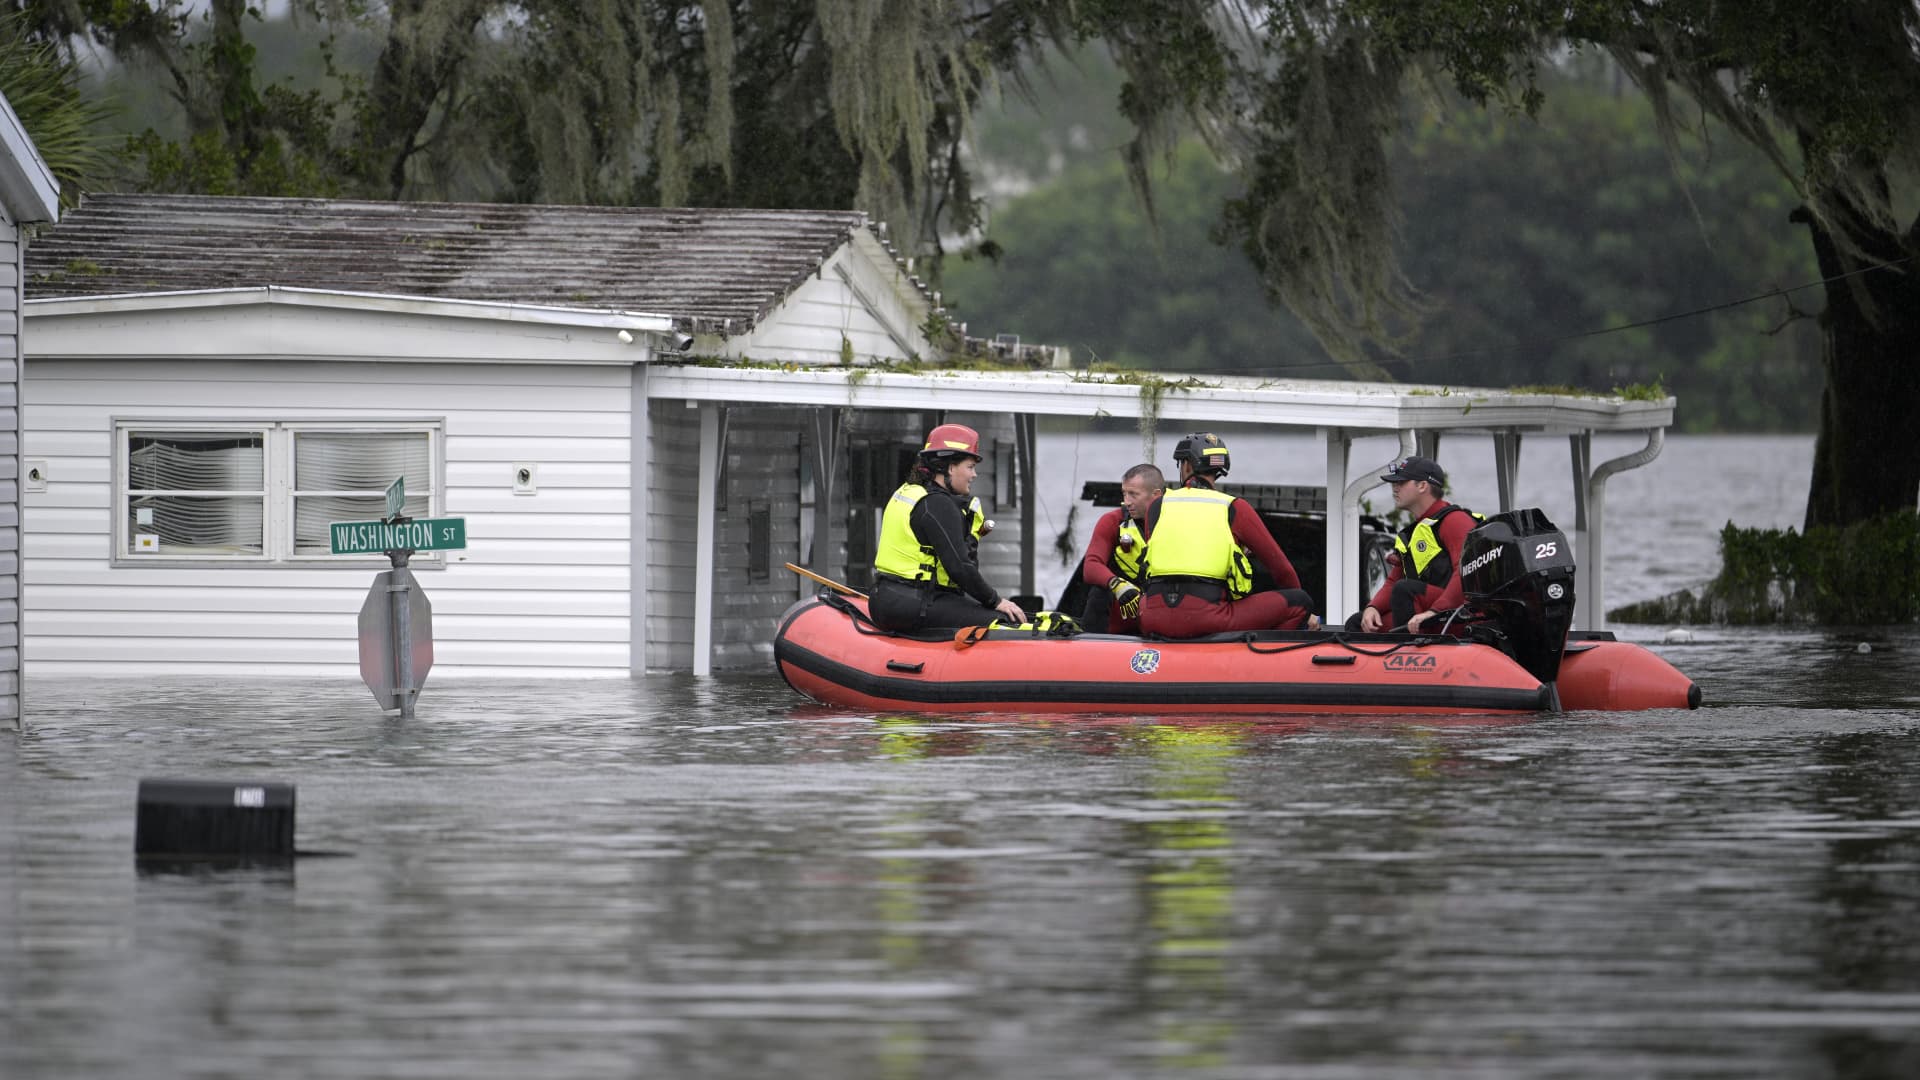 First responders with Orange County Fire Rescue check the welfare of residents as they make their way through a flooded neighborhood in the aftermath of Hurricane Ian, Thursday, Sept. 29, 2022, in Orlando, Fla.